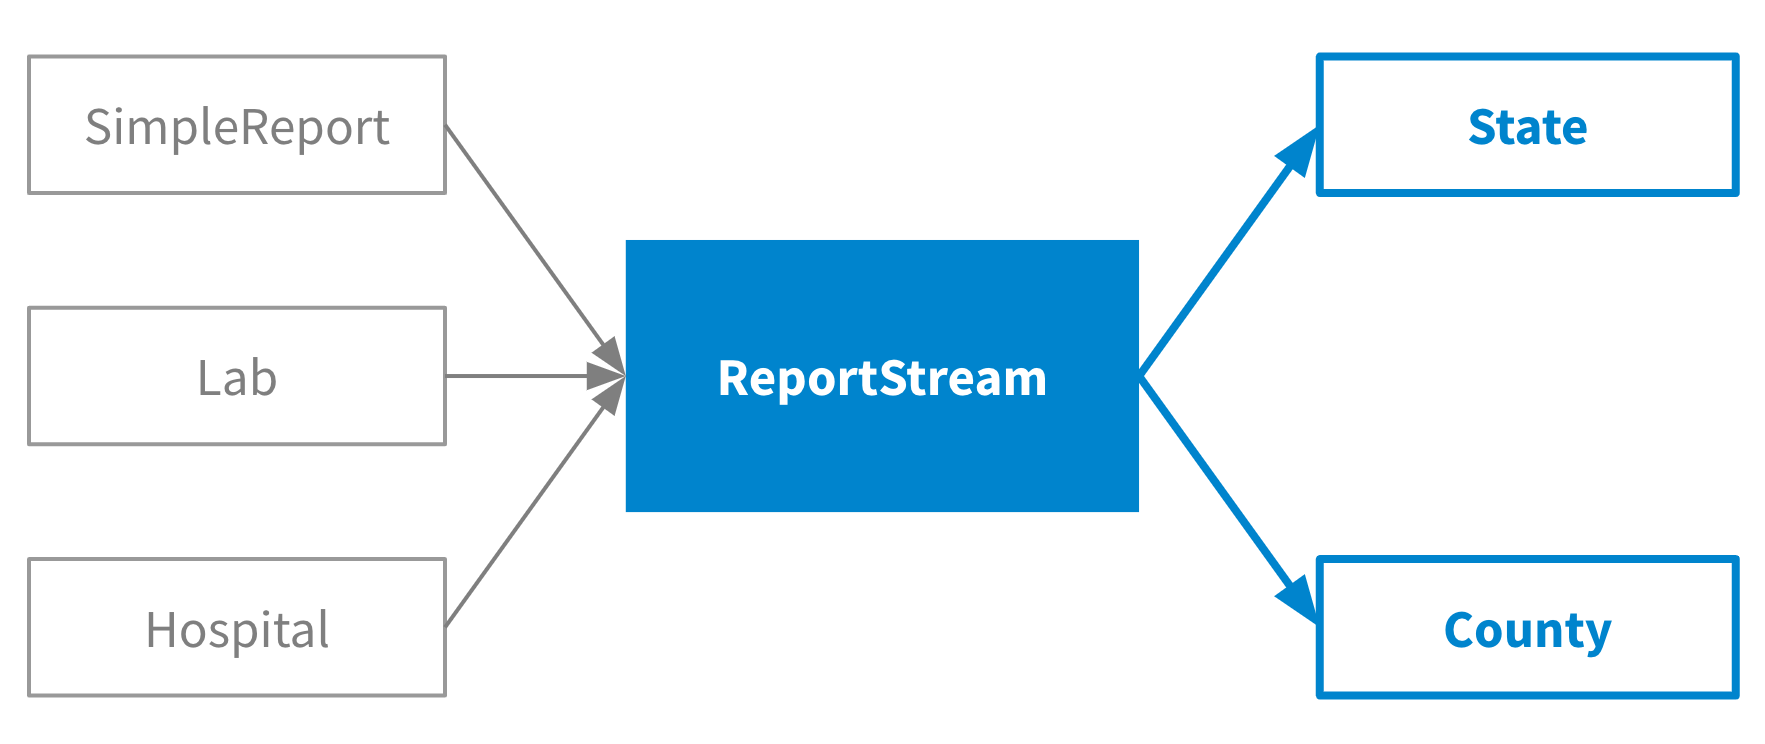 Diagram showing how SimpleReport, lab, and hospitals all send data to the Data Hub, which then sends data to state and county public health departments